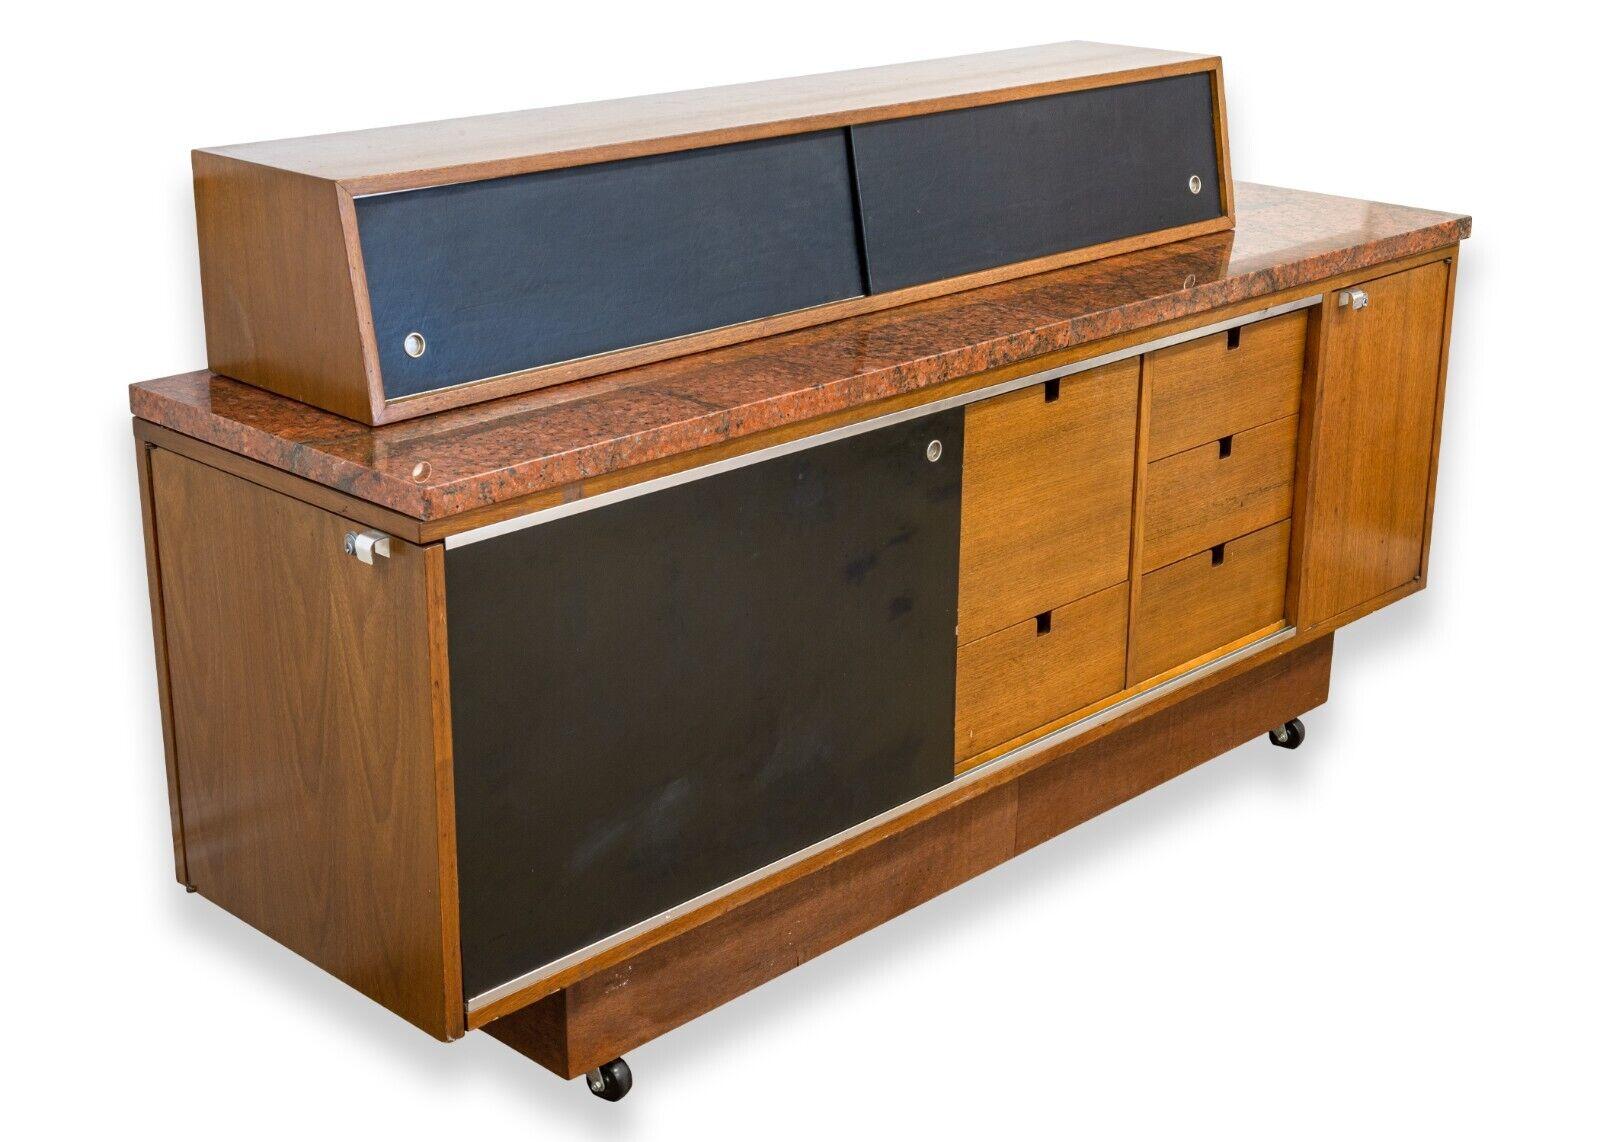 A mid century modern George Nelson for Herman Miller custom designed sideboard credenza. A stunning piece of iconic furniture from George Nelson for Herman Miller. This sideboard credenza features a custom red granite top, rolling caster legs, a